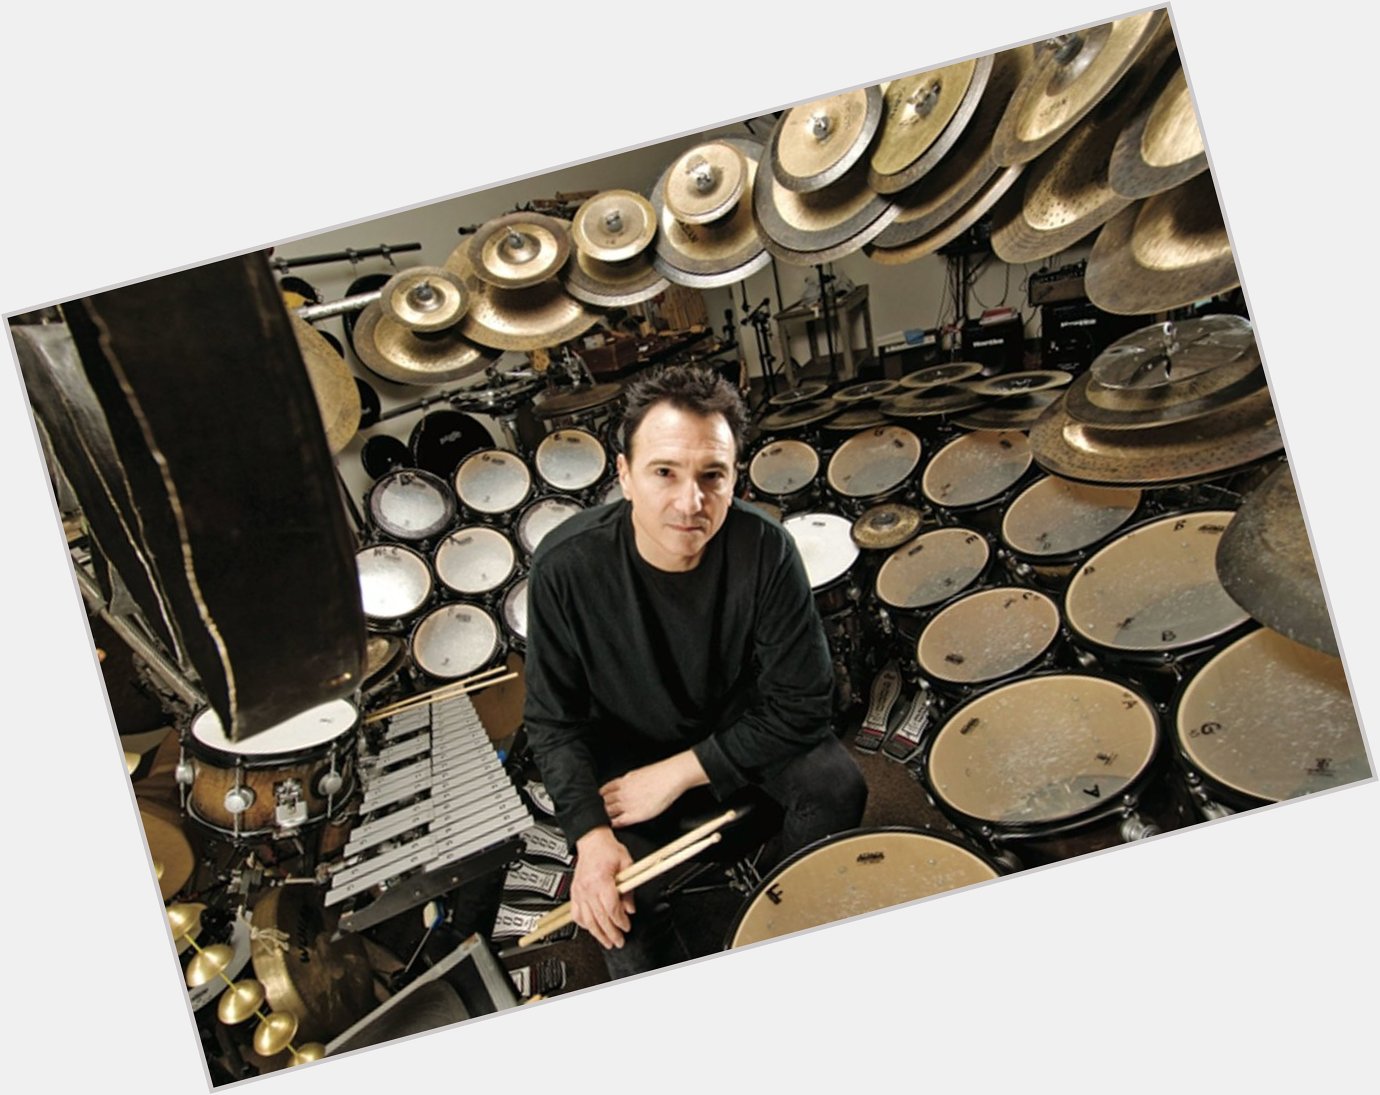 Birthday wishes go out today to Master Terry Bozzio ... Happy 70th mate ! ... \\m/ 